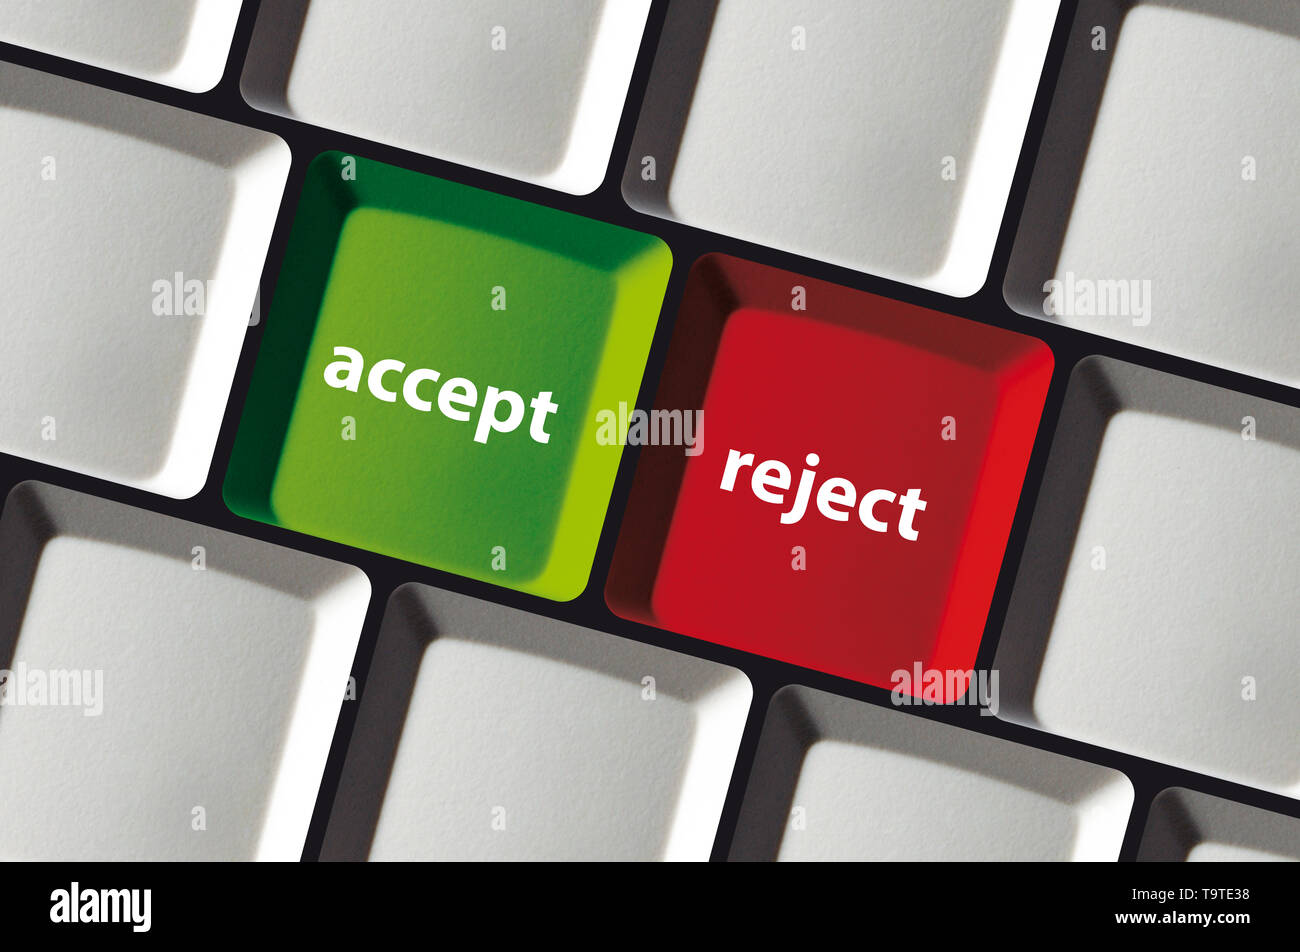 Accept or Reject on green and red button on keyboard - concept elections policy court decision making Stock Photo